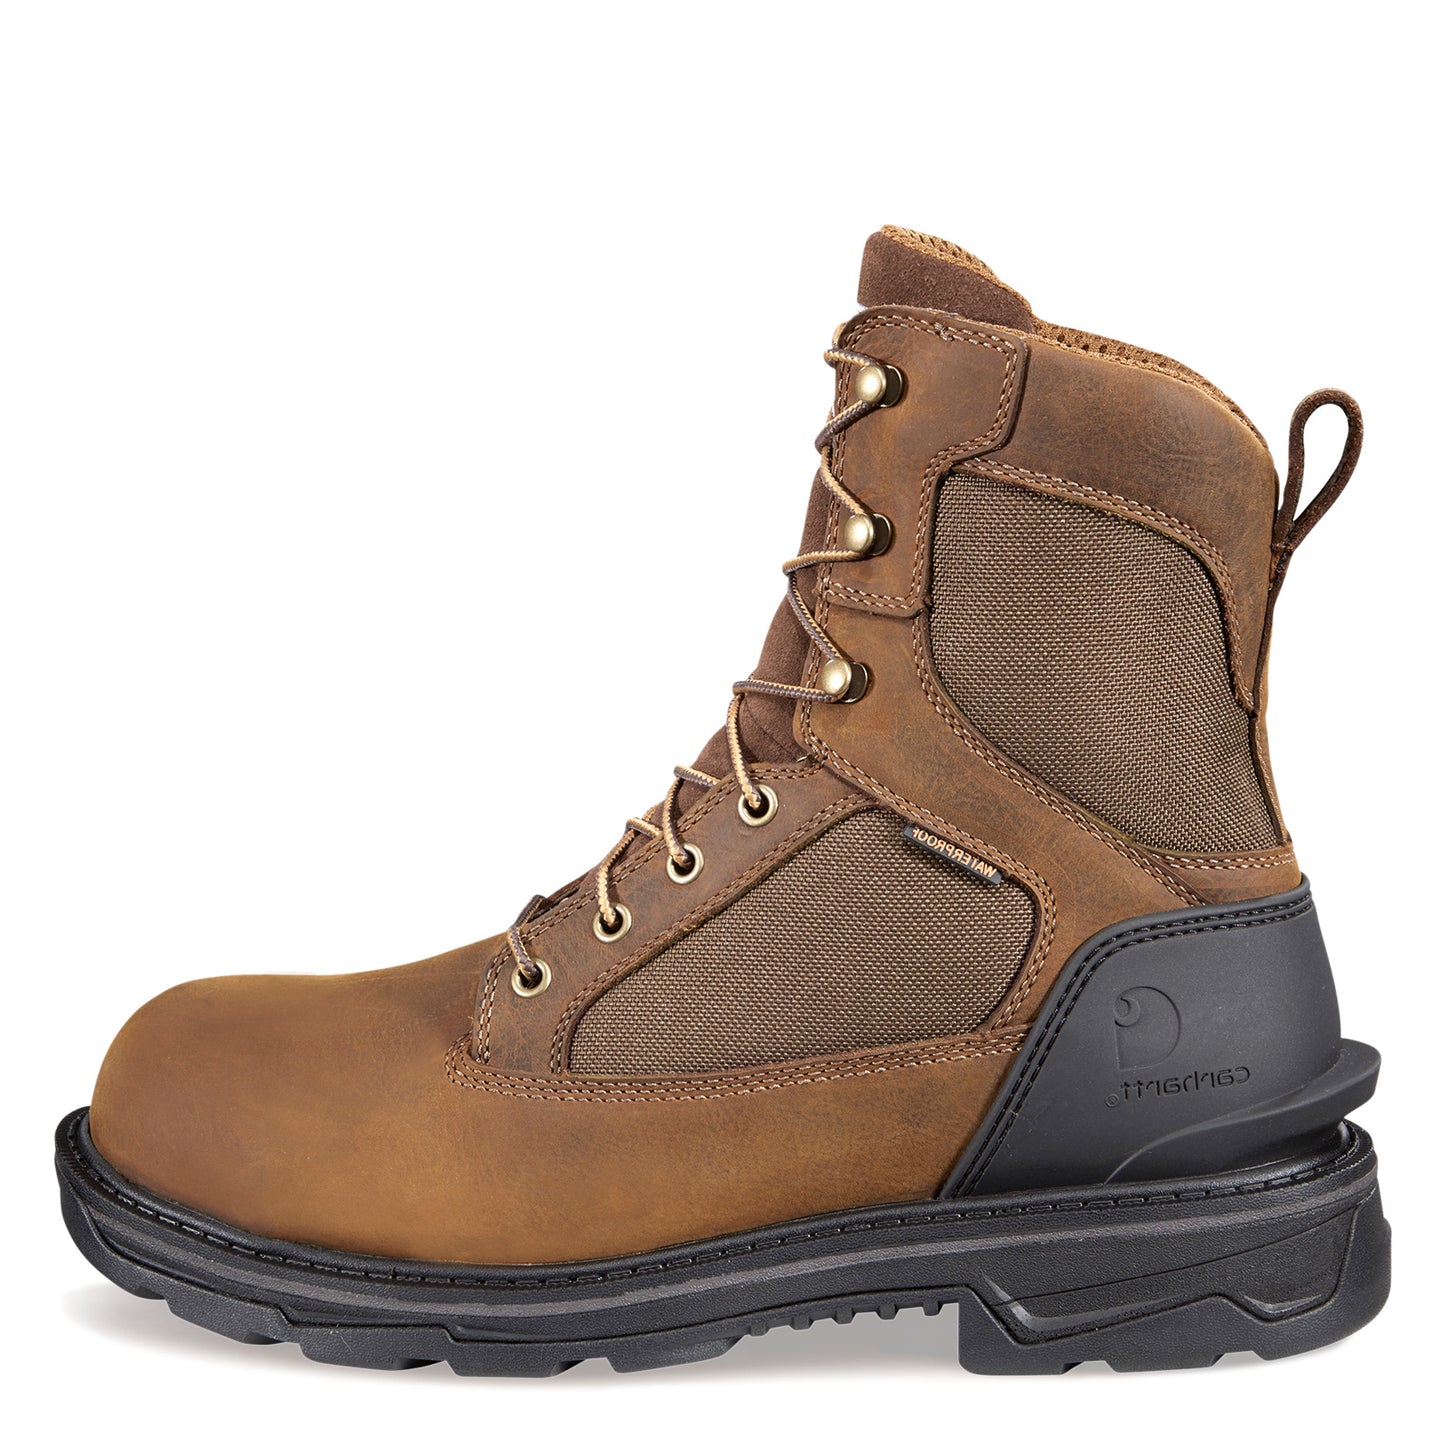 Peltz Shoes  Men's Carhartt Ironwood WP 8in Alloy Toe Boot BROWN FT8500-M